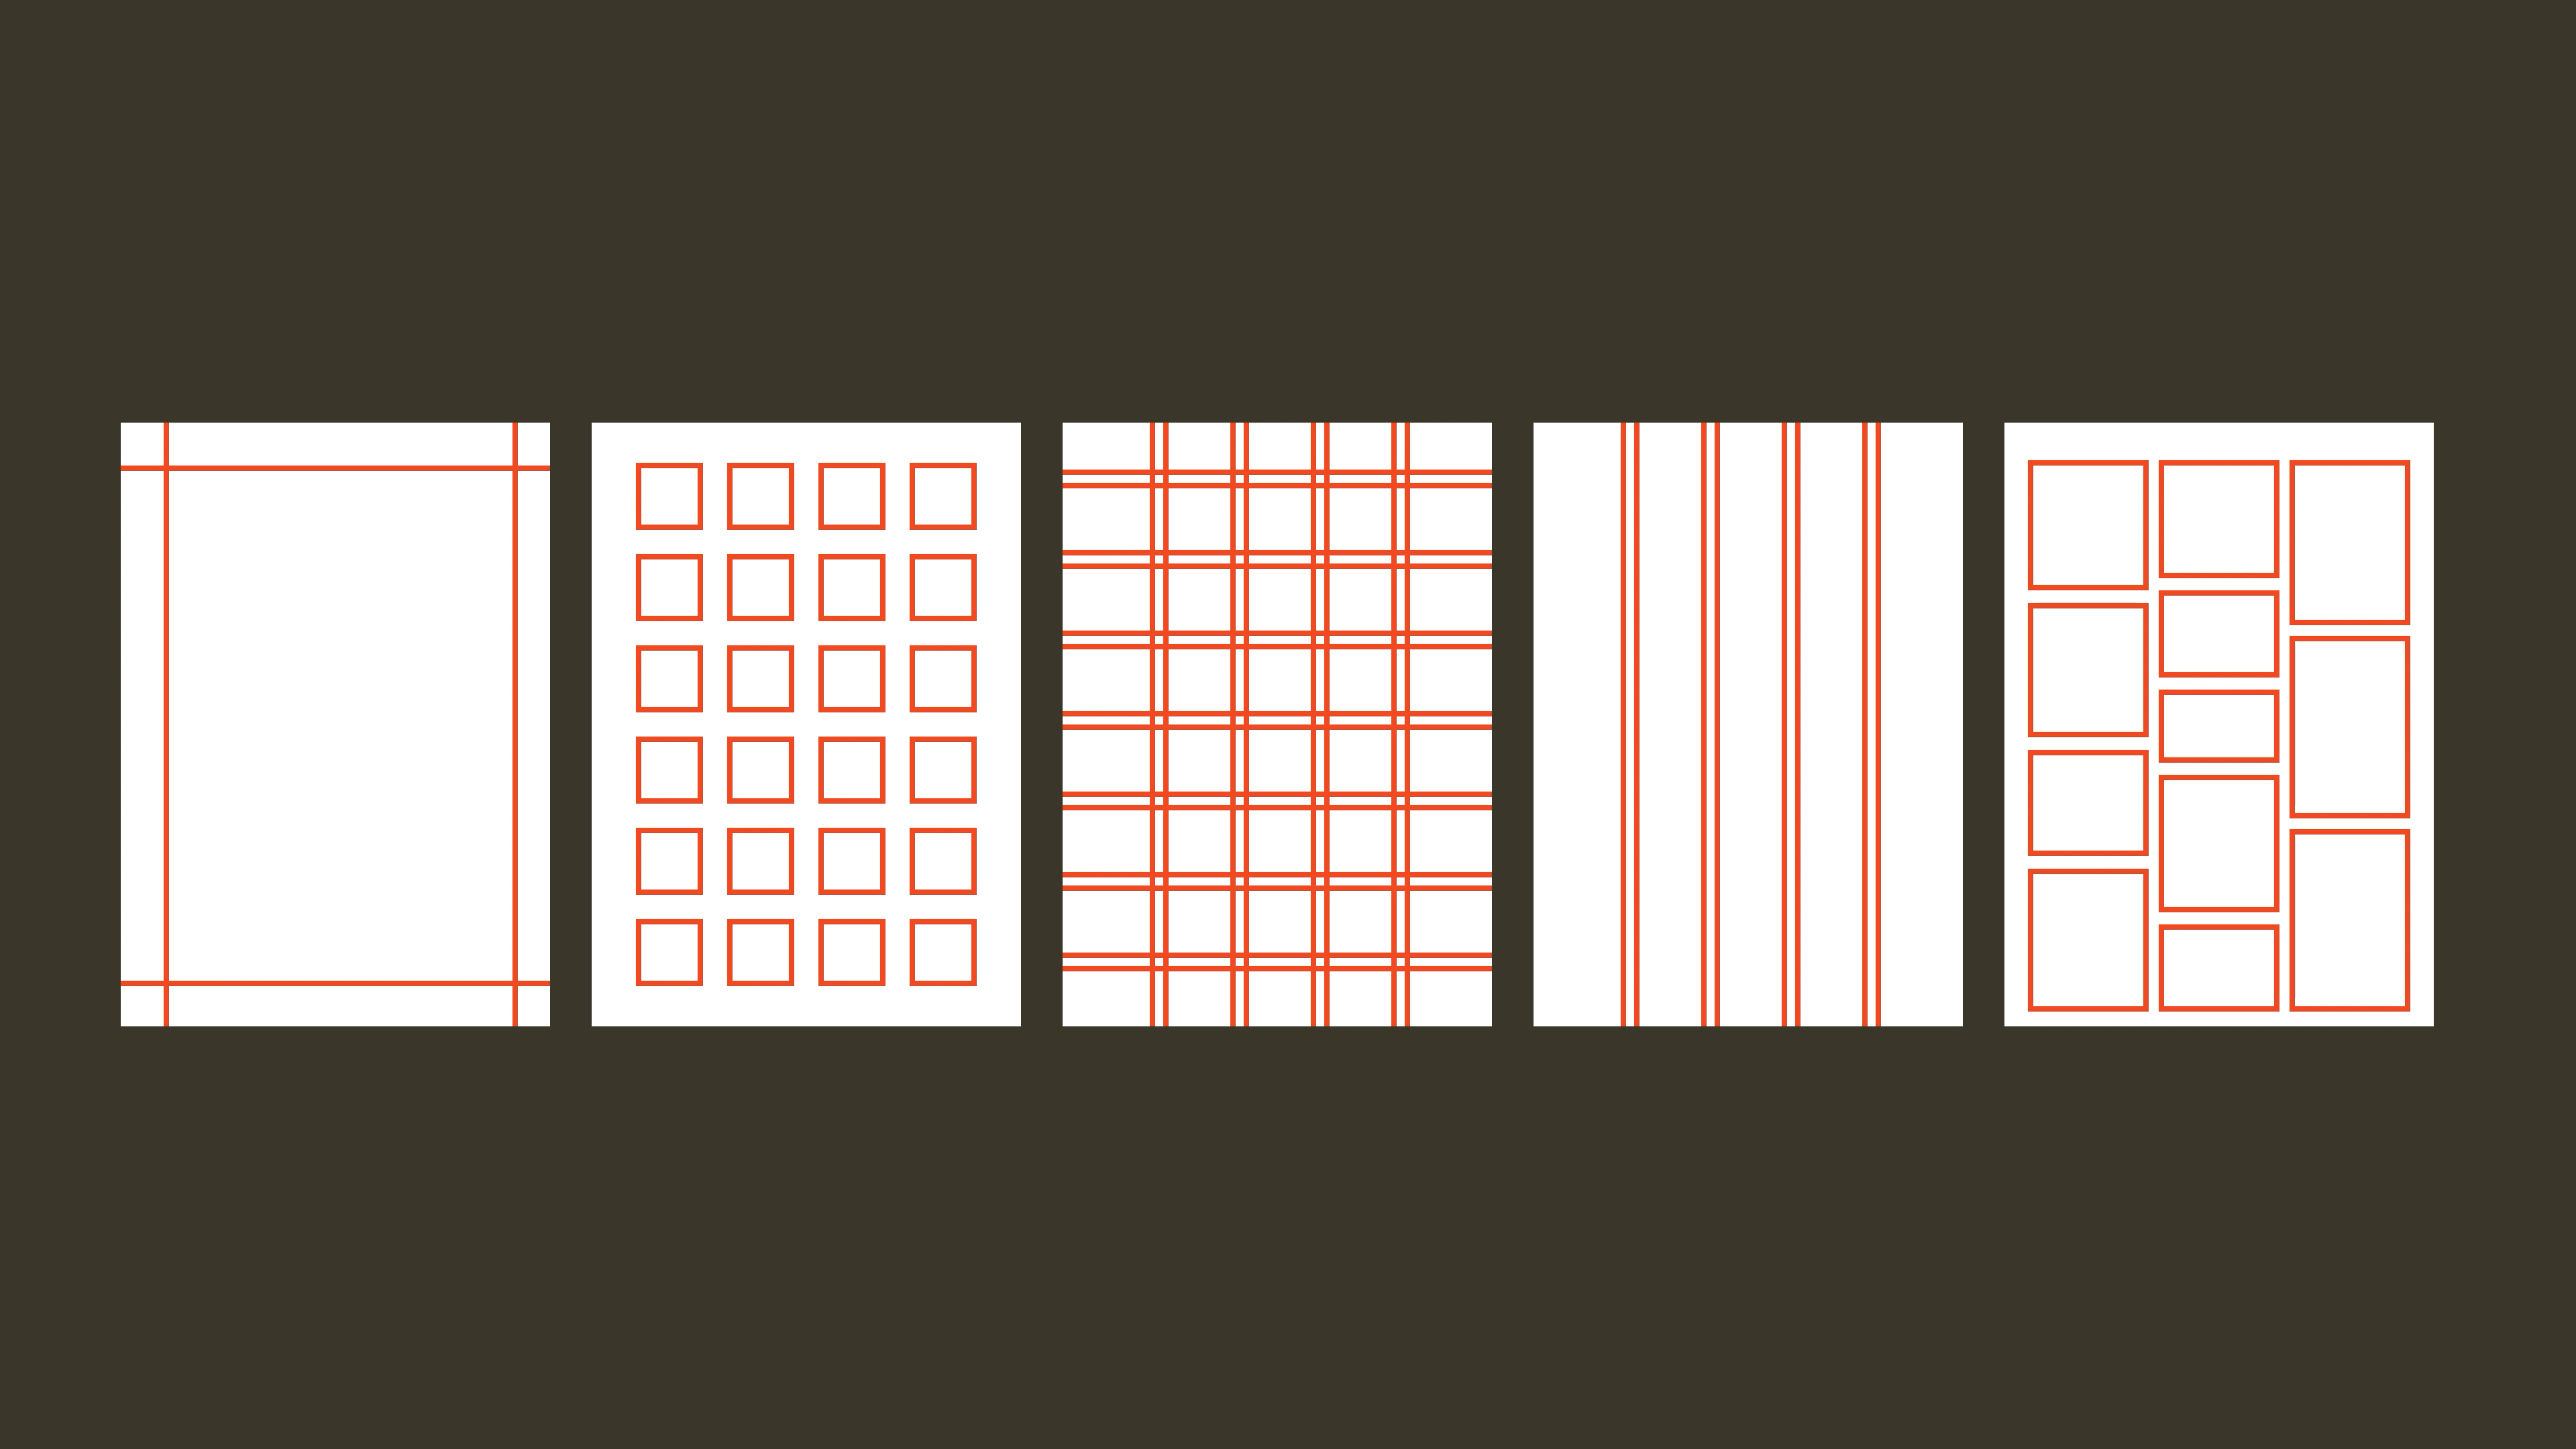 Other_grid_types.png